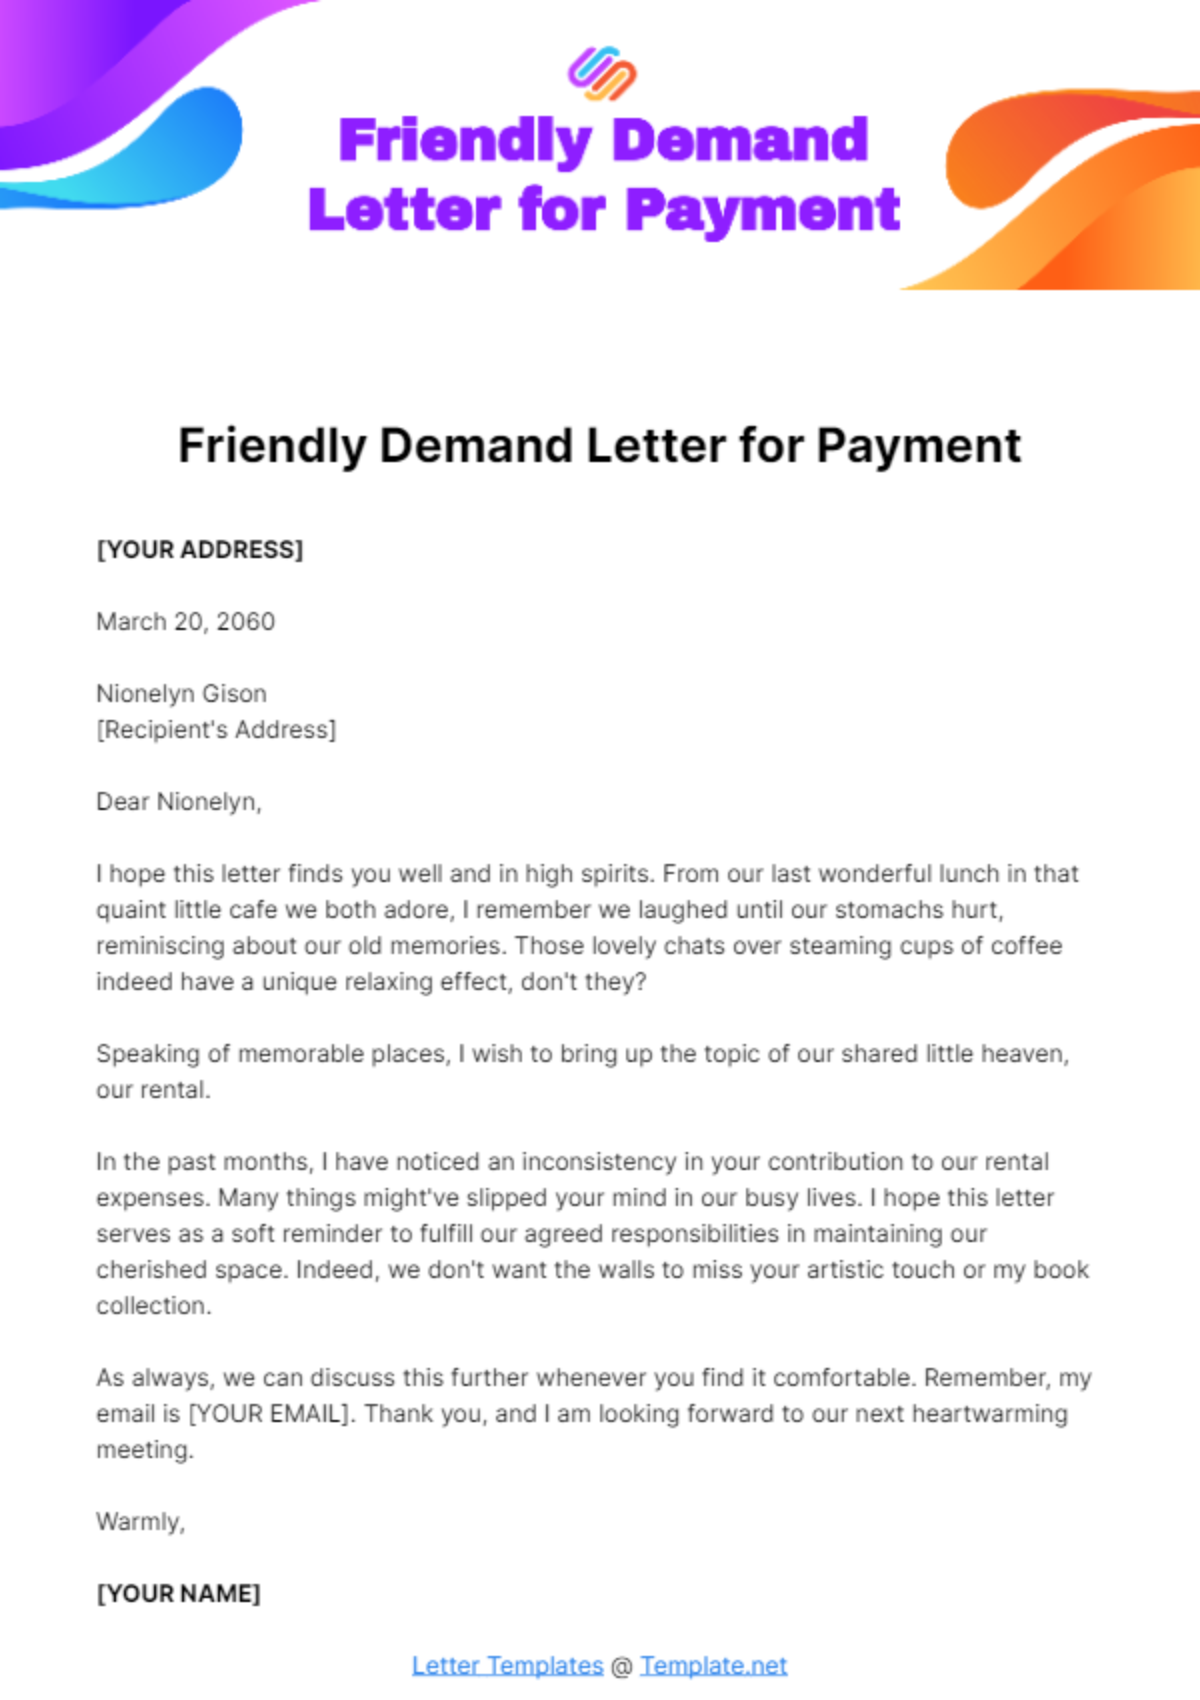 Friendly Demand Letter for Payment Template